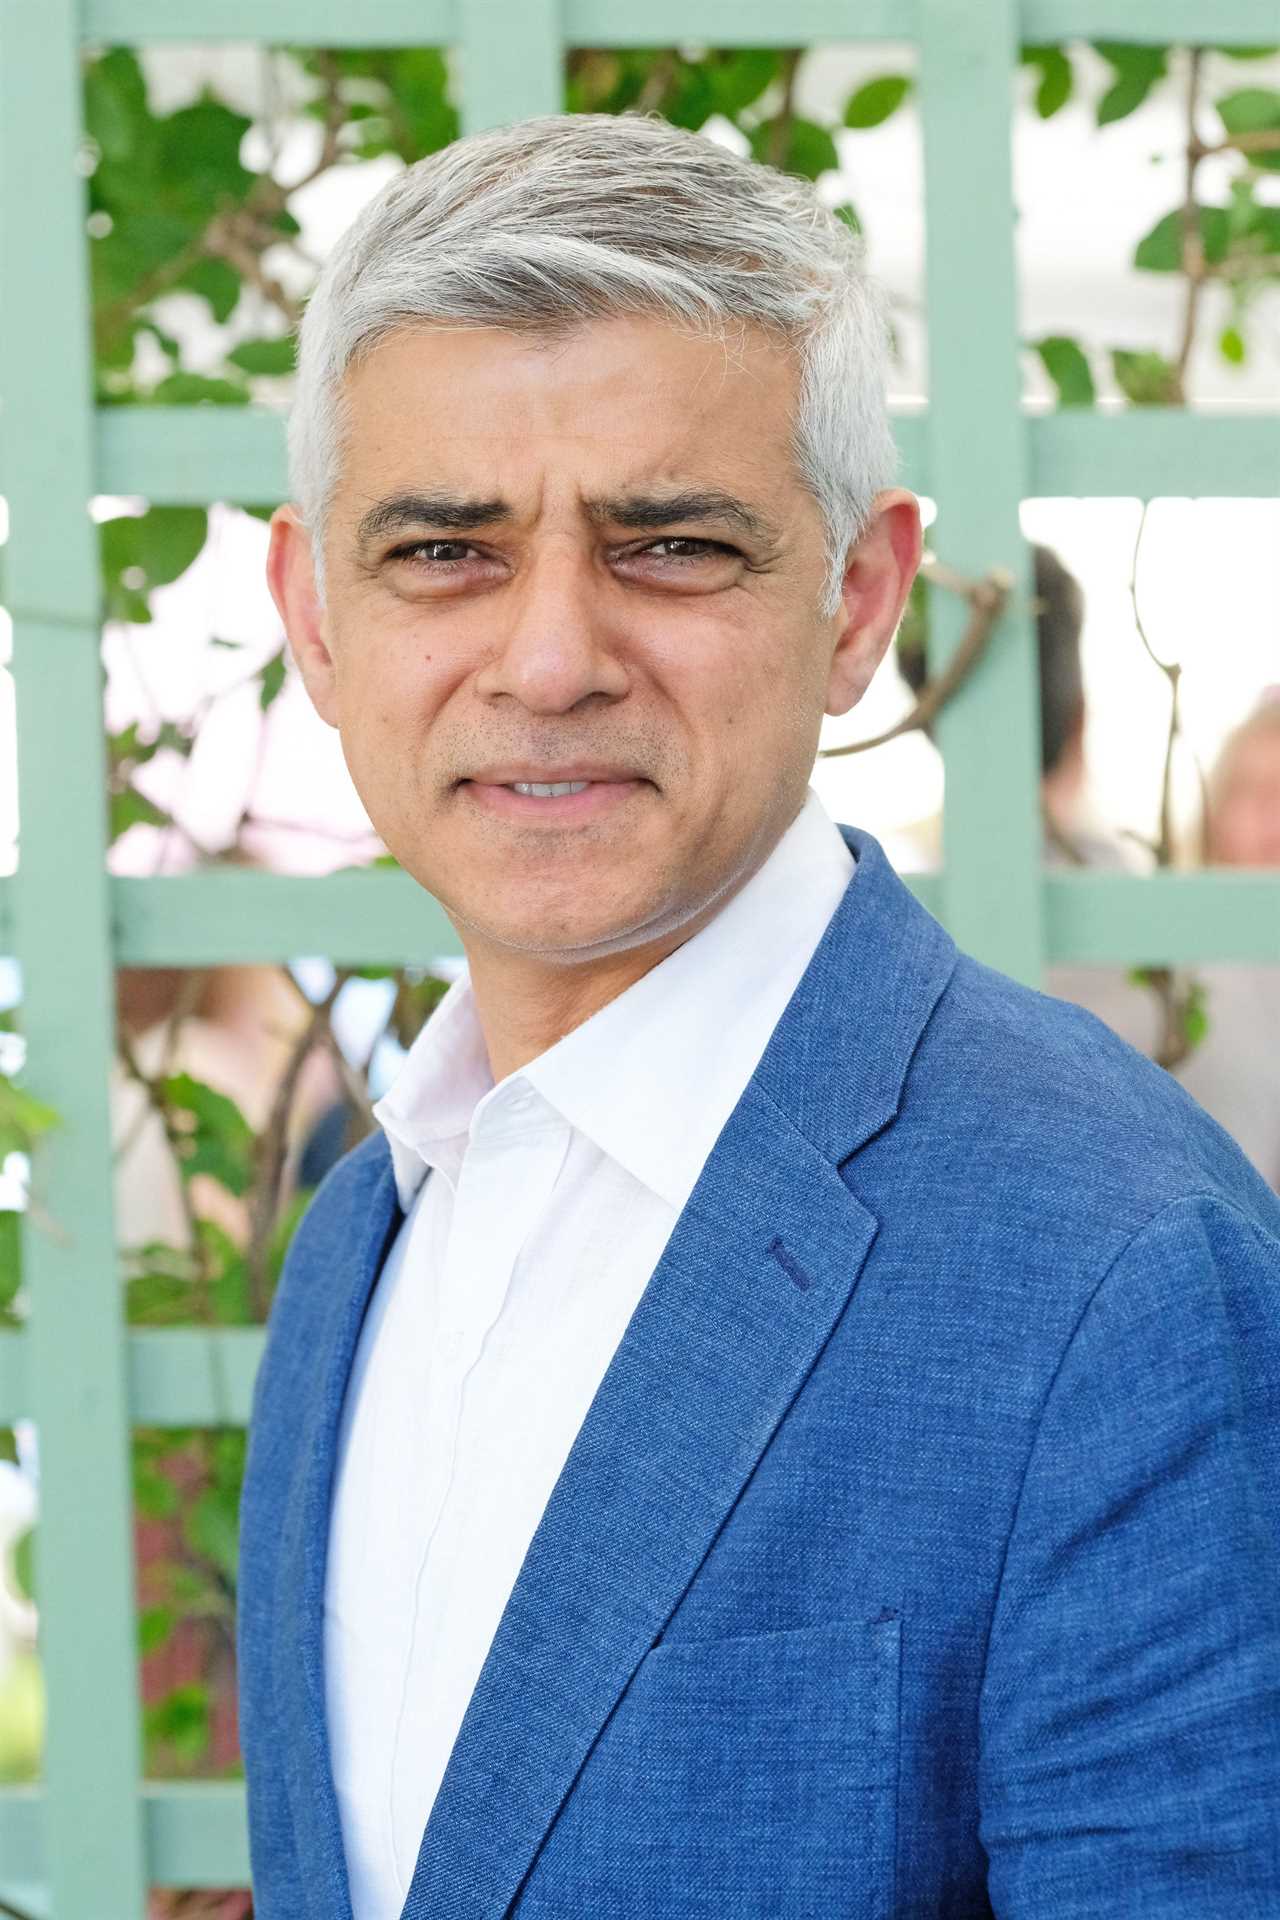 Tory London Mayor hopeful didn’t own a pair of shoes until he was 16 and grew up in Bangladeshi mud hut